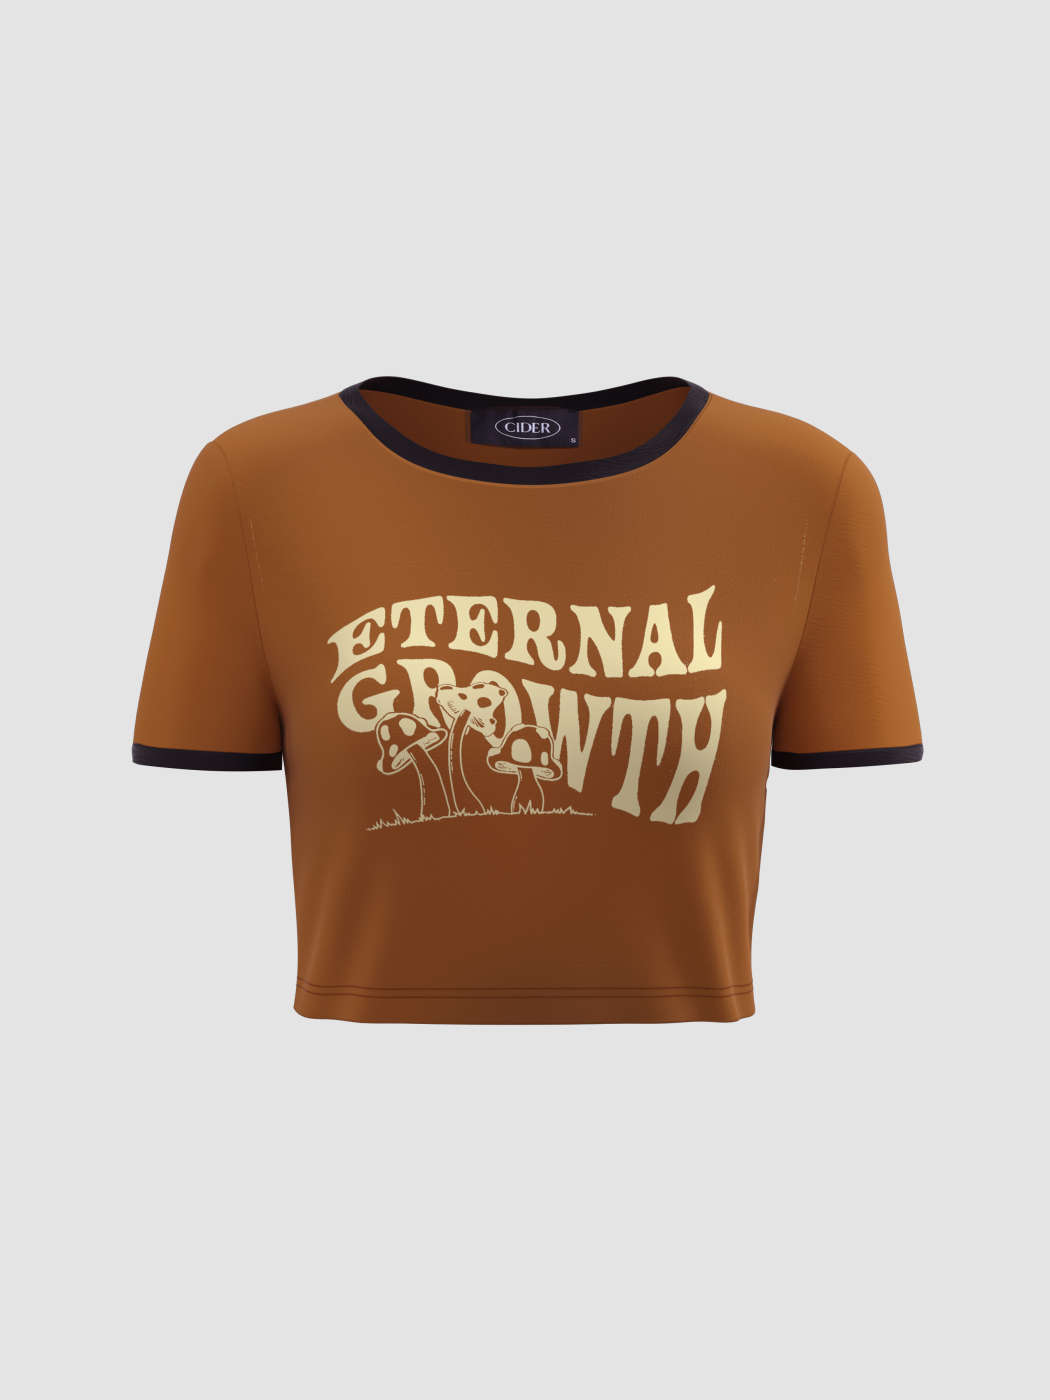 Top cropped gráfico Eternal Growth - Cider